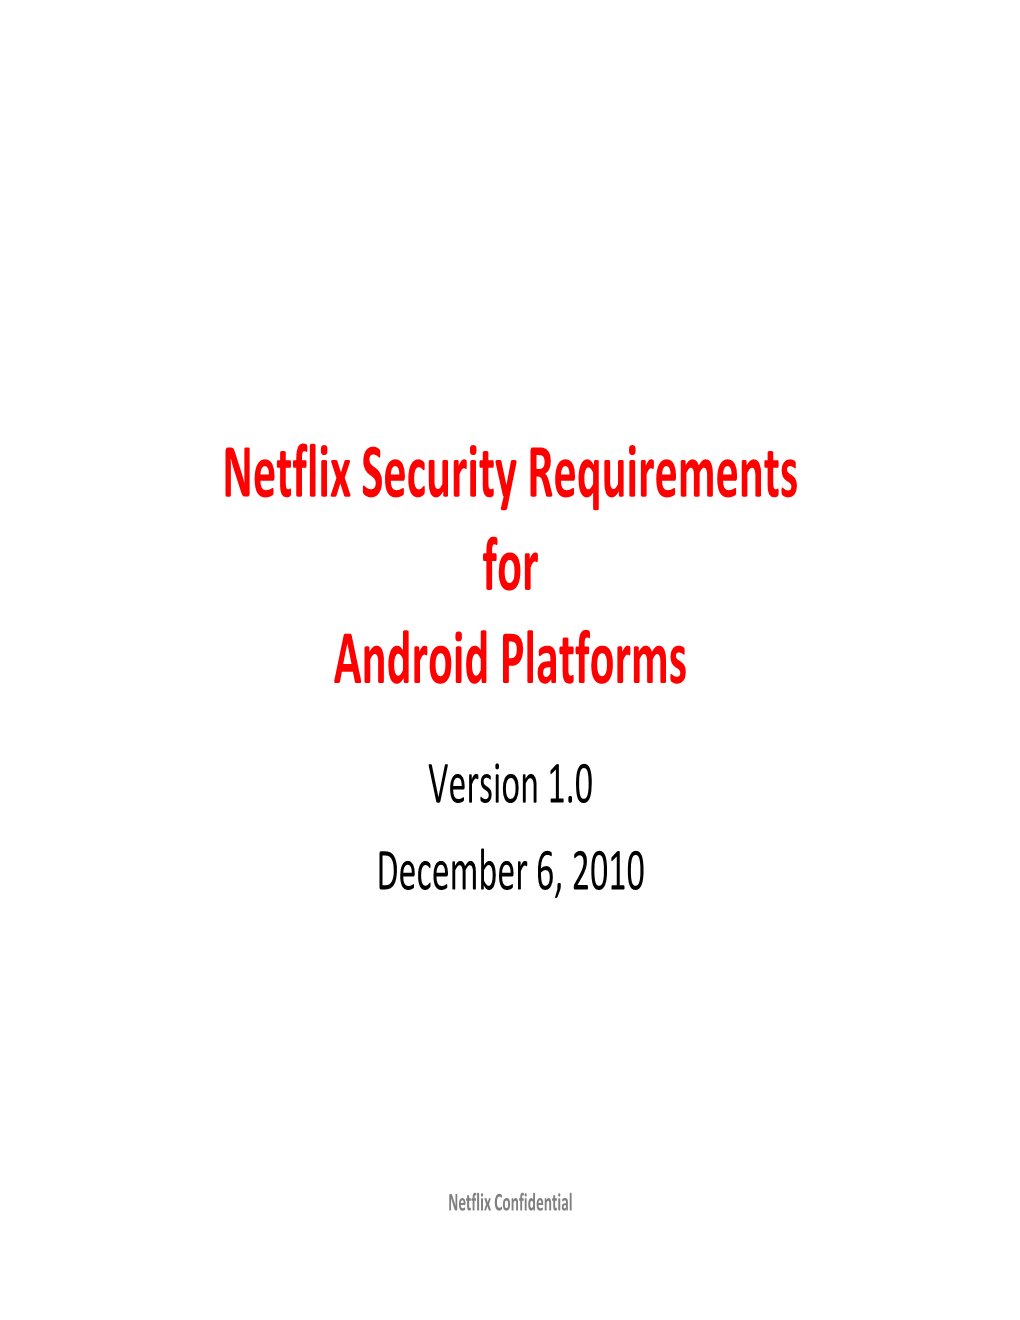 Netflix Security Requirements for Android Platforms Version 1.0 December 6, 2010